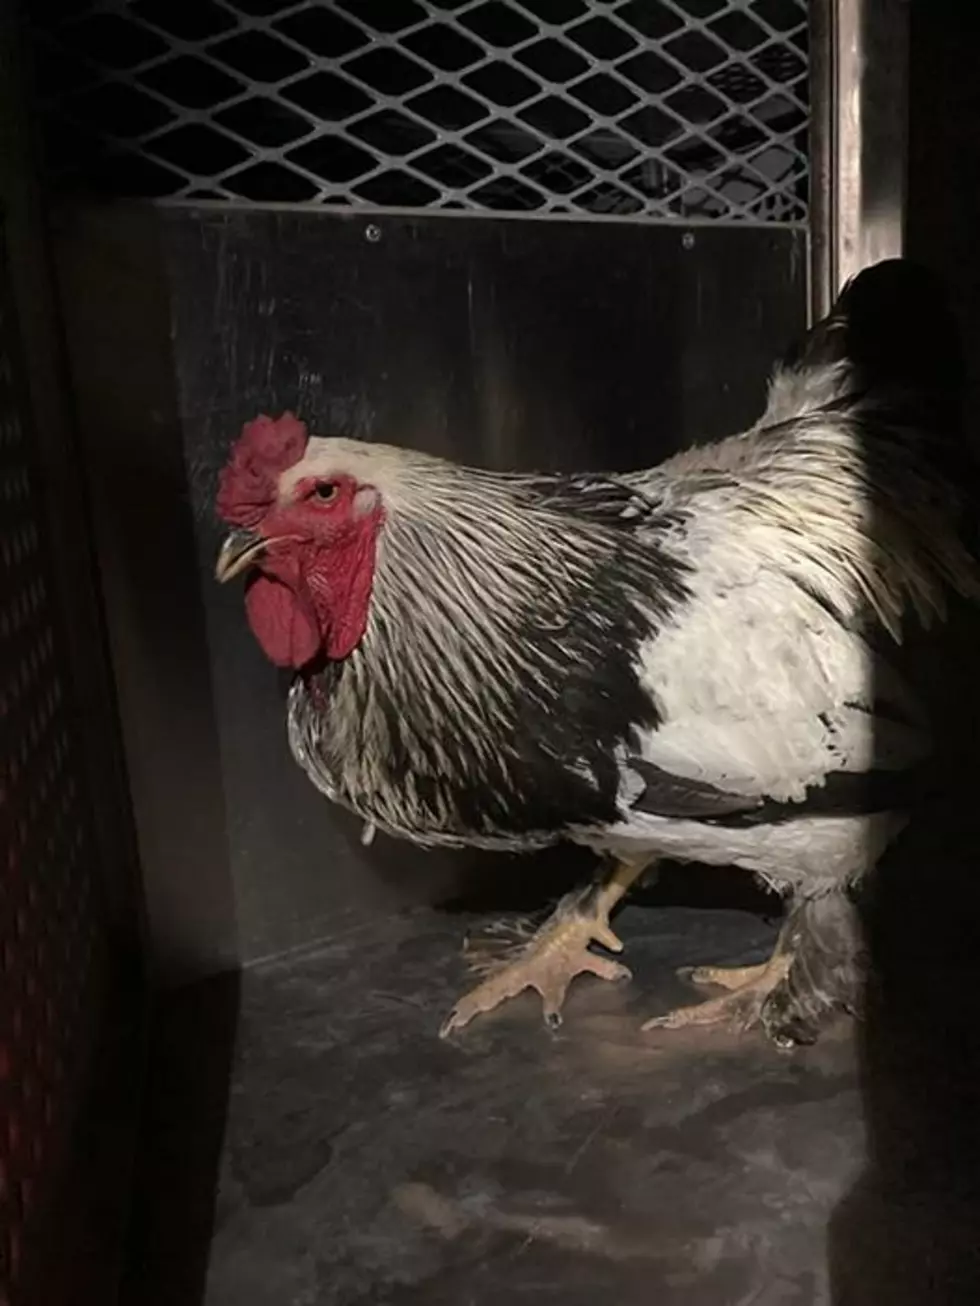 Lubbock, Which One of You Lost Your Forbidden Rooster?